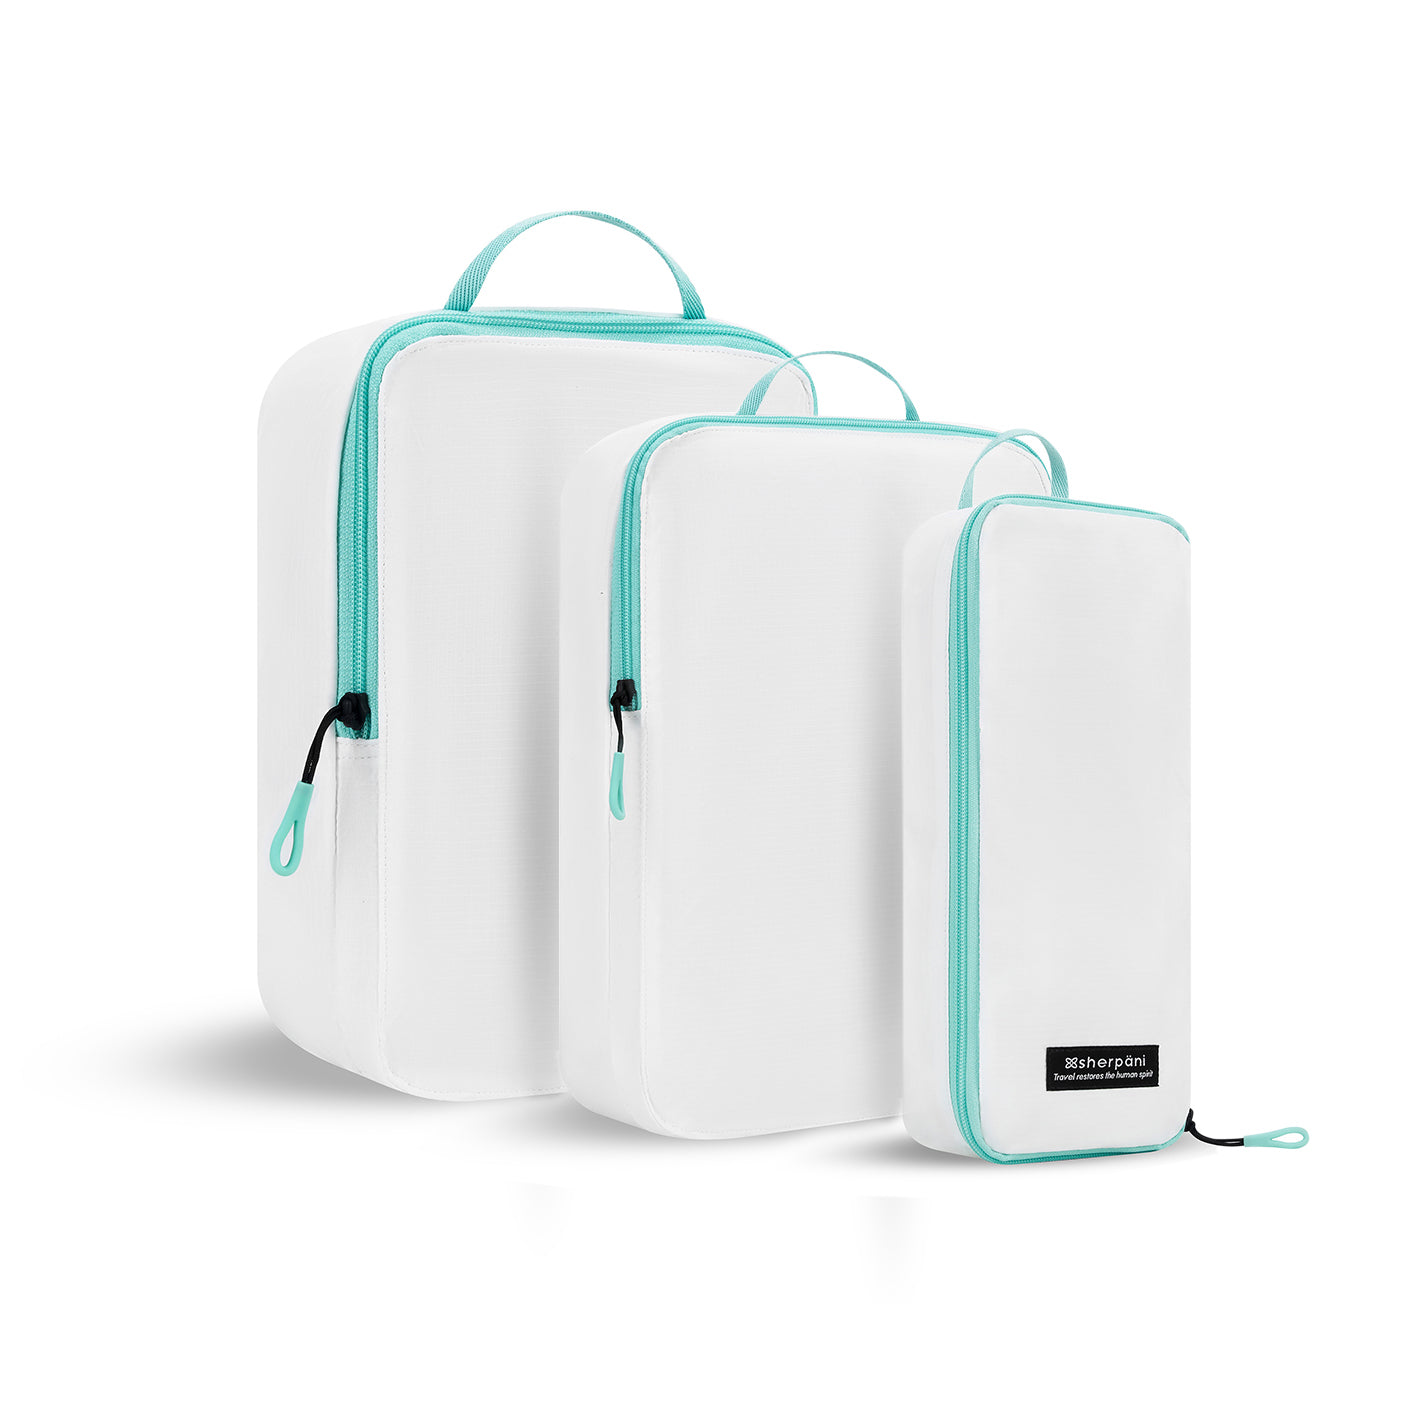 Angled front view of the Compass Packing Cubes in three sizes: small, medium and large. The cubes are white with zipper and handle accented in aqua. 